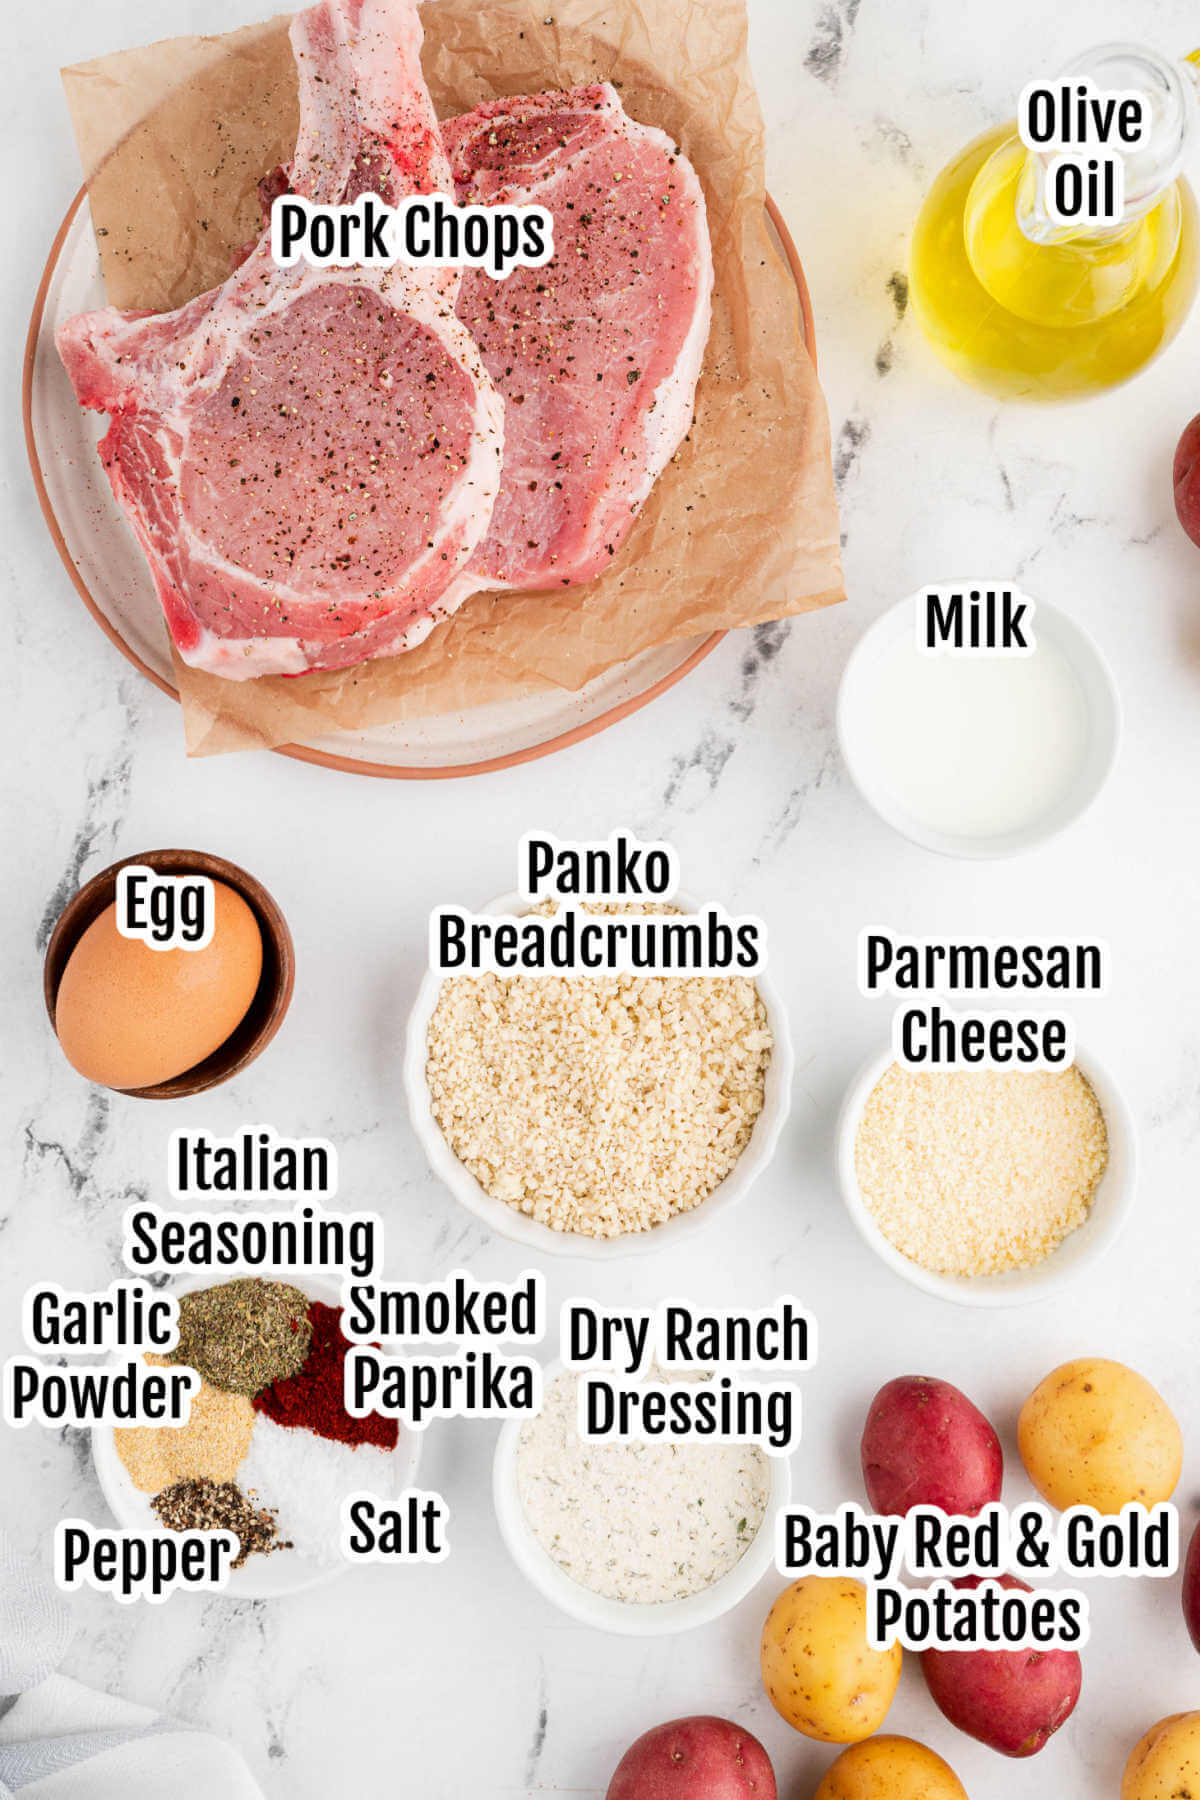 Image of ingredients needed for Shake and bake Pork Chops. 